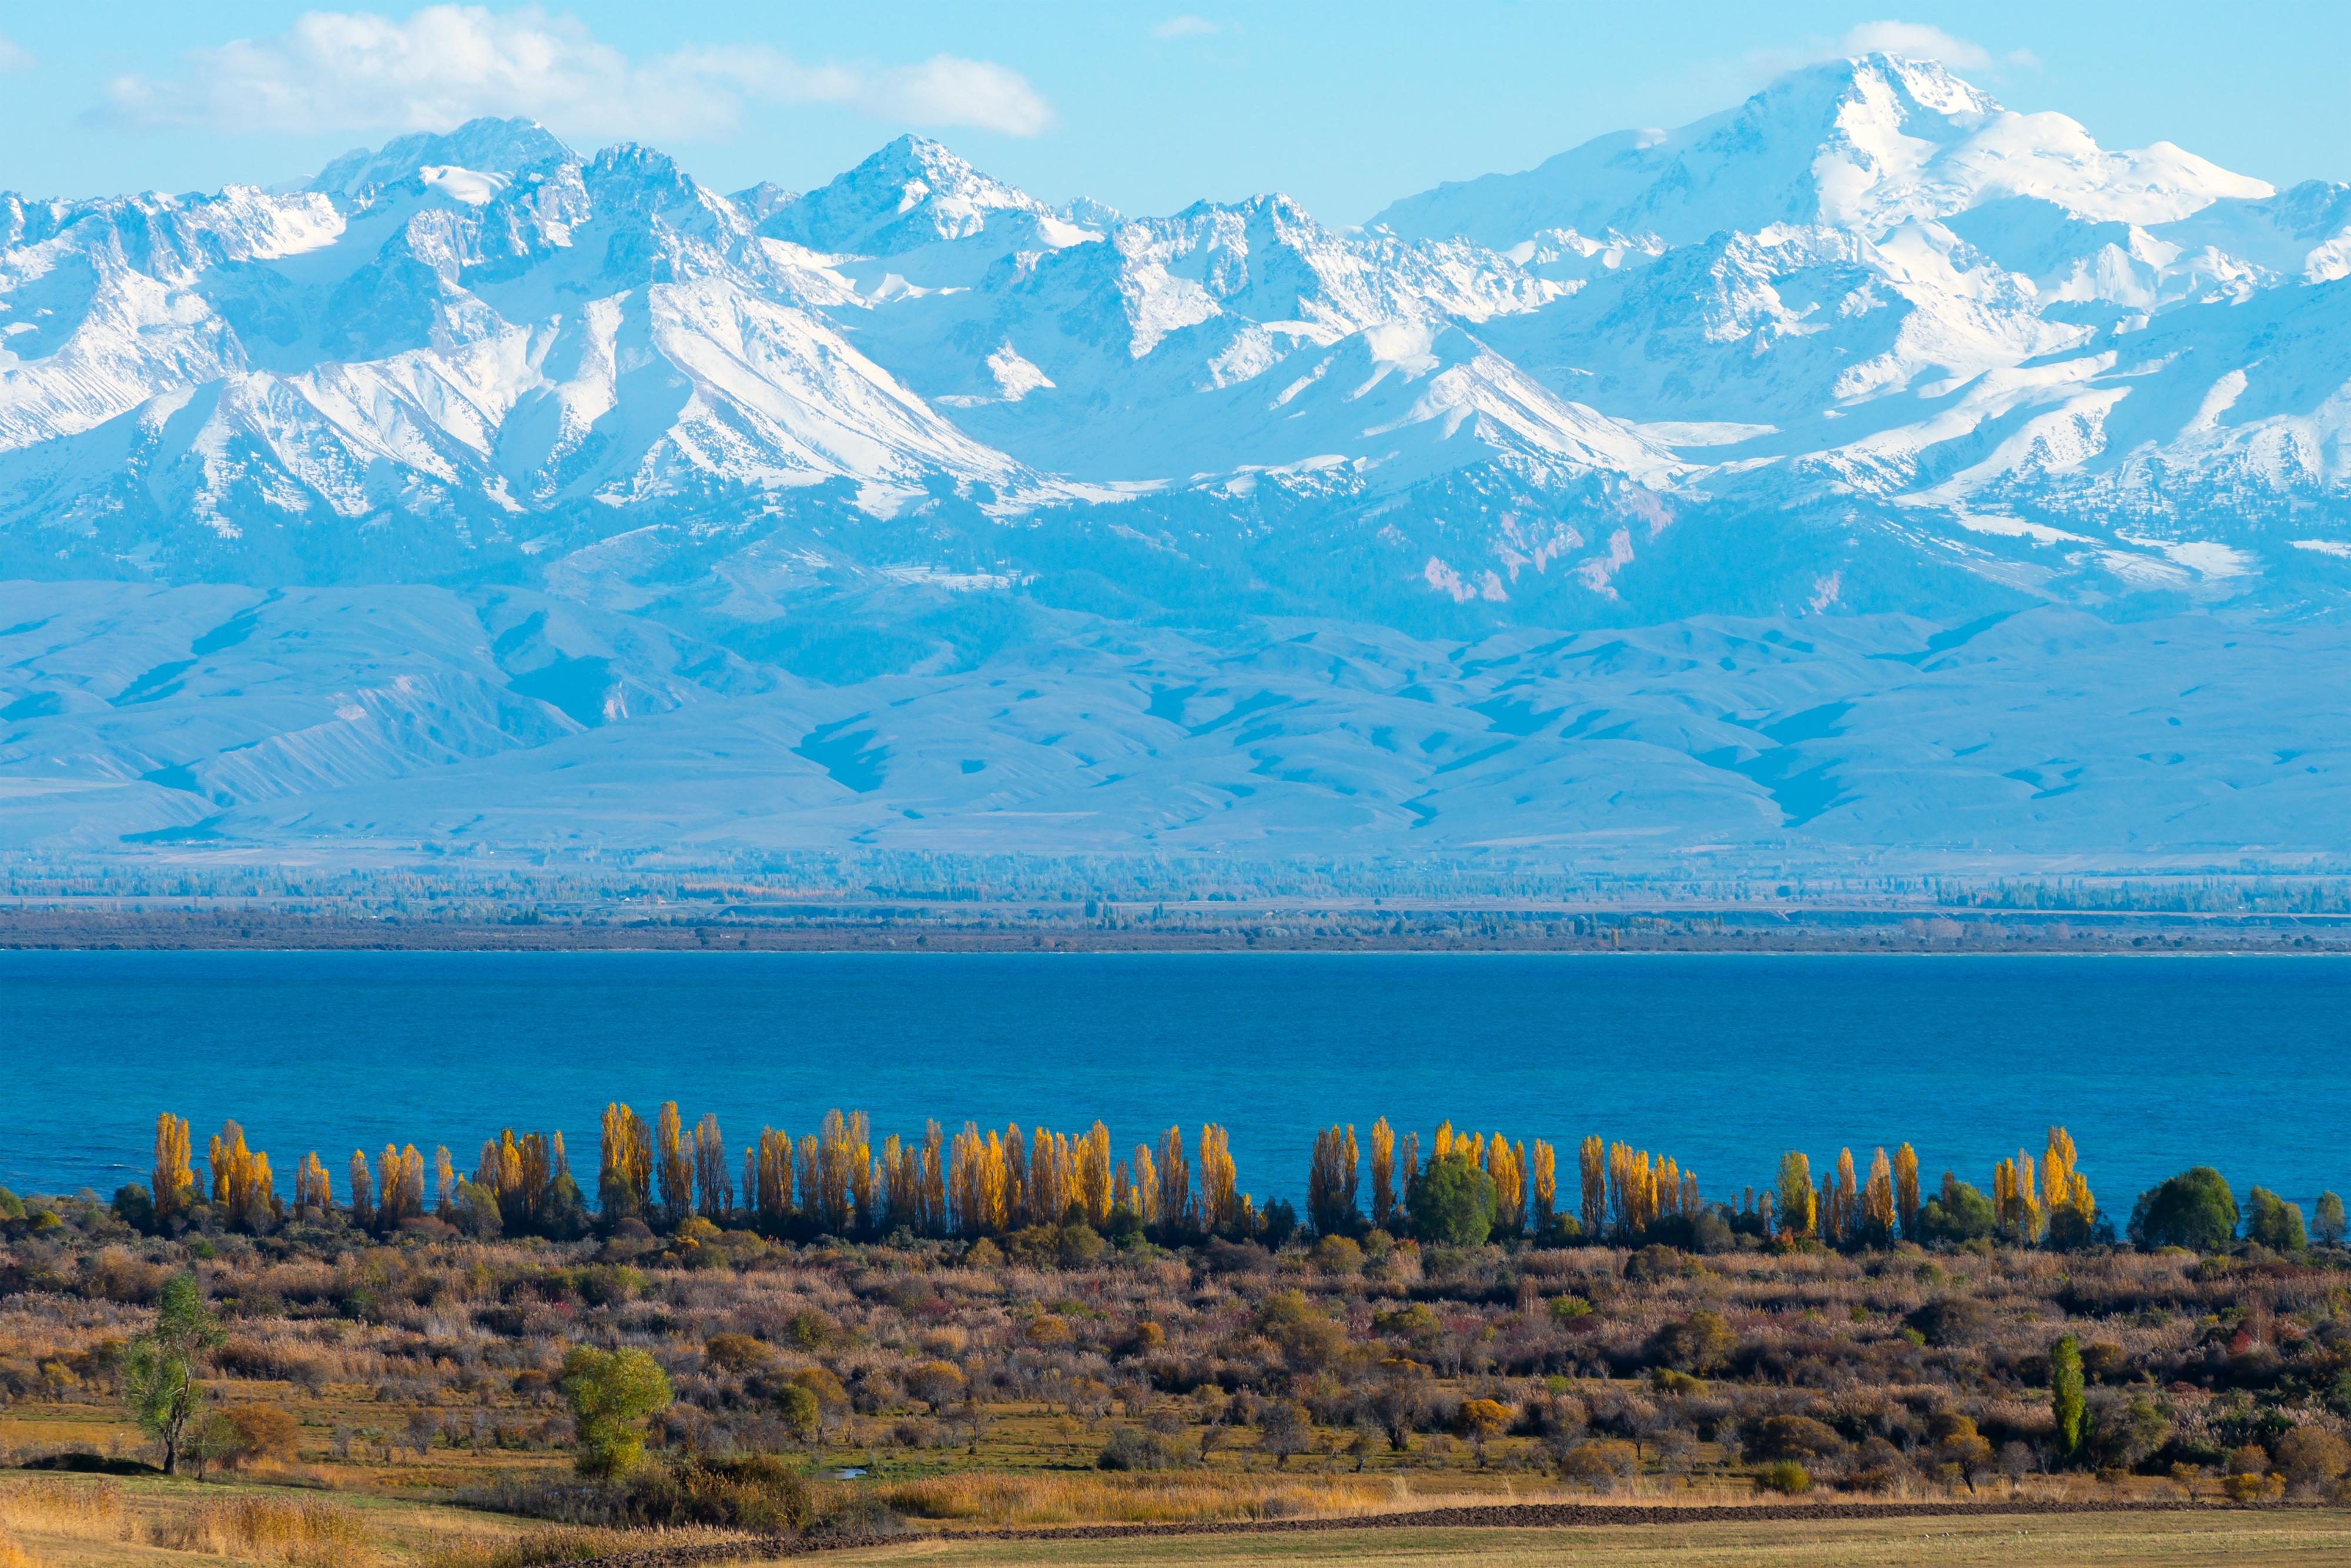 Issyk-Kul lake with the Tien Shan Mountains on the back - Photo credit: Thiago B Trevisan